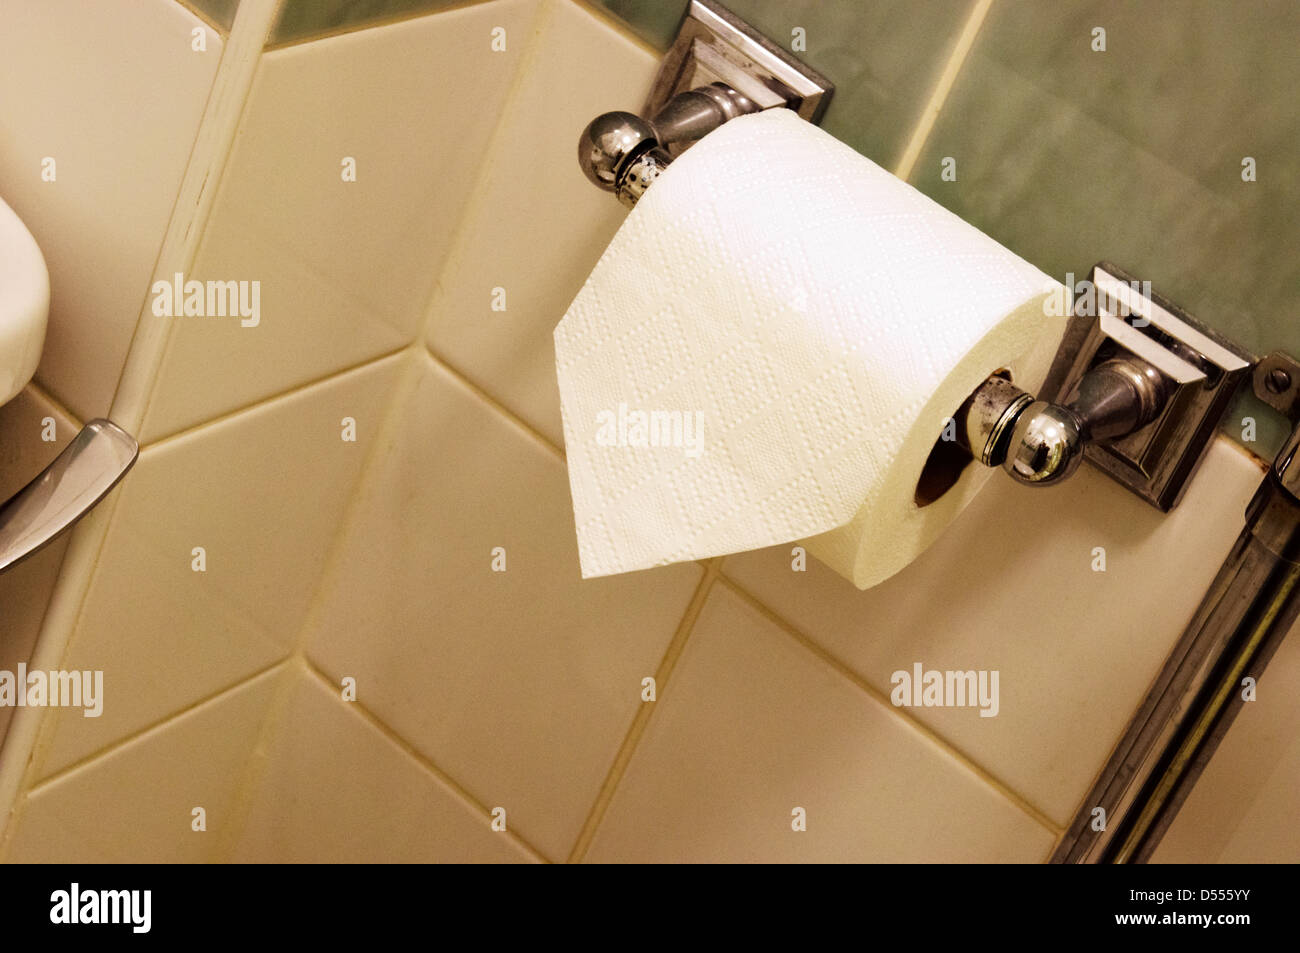 Folded end of toilet roll on a chrome holder in a tiled hotel bathroom. Stock Photo